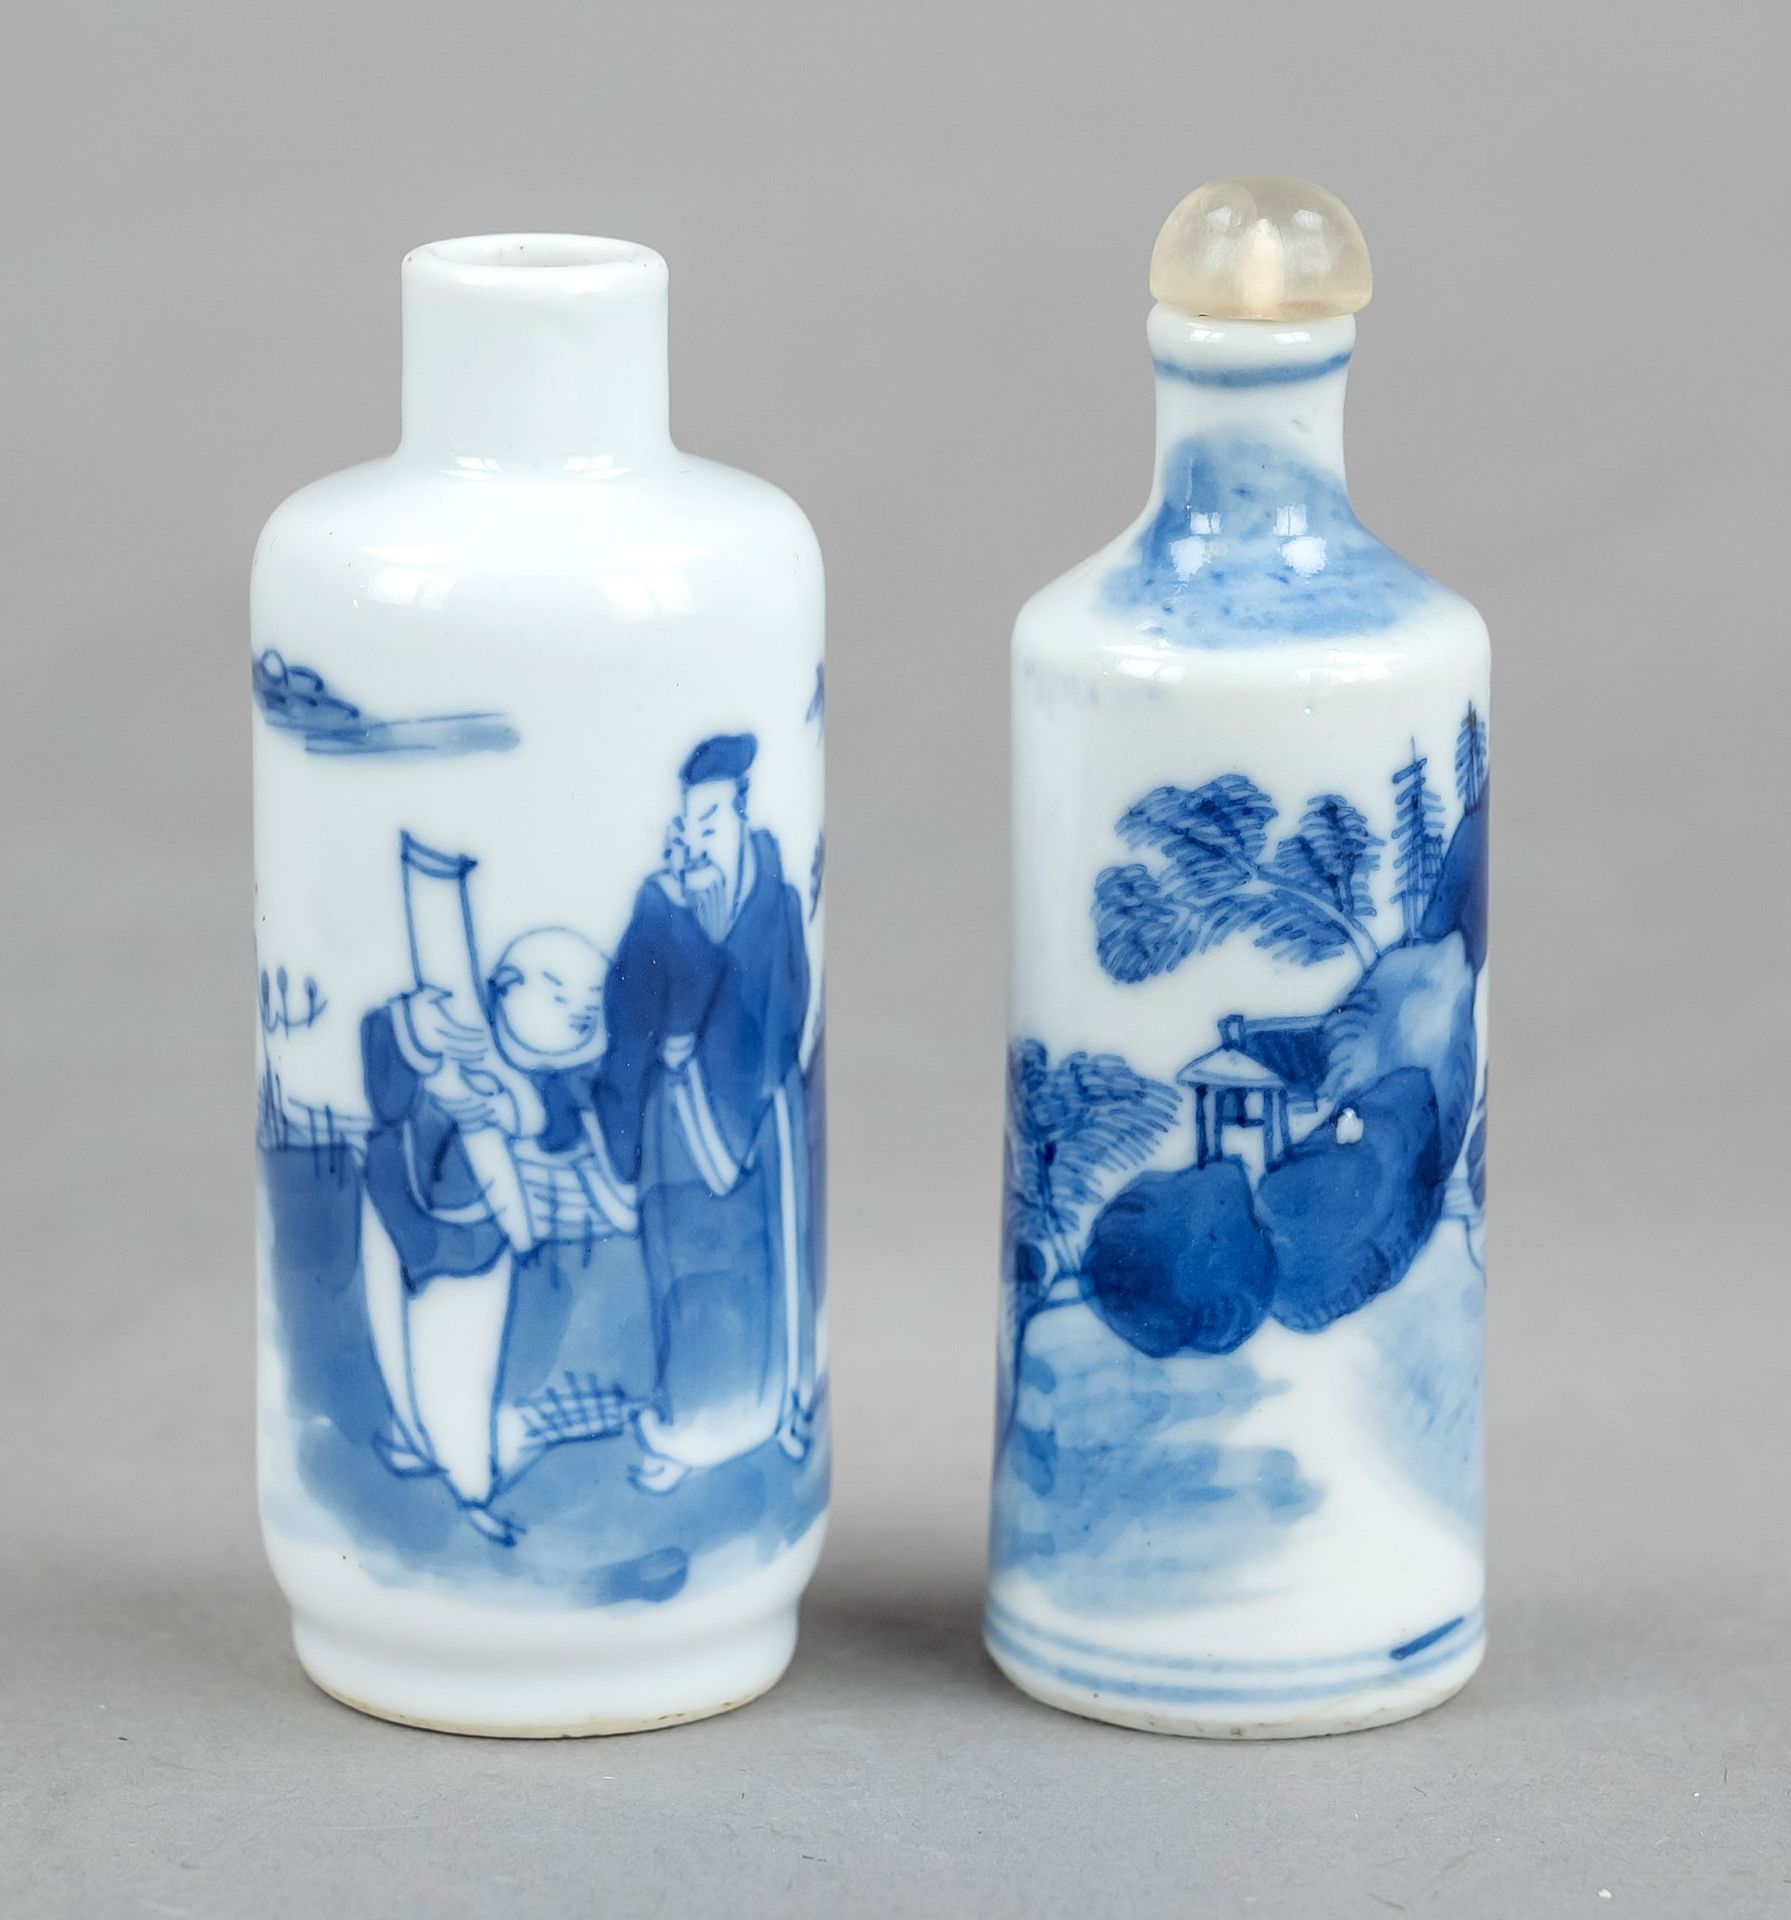 2 Snuffbottles, China, Qing dynasty(1644-1911), 19th century, porcelain in the shape of a rouleau